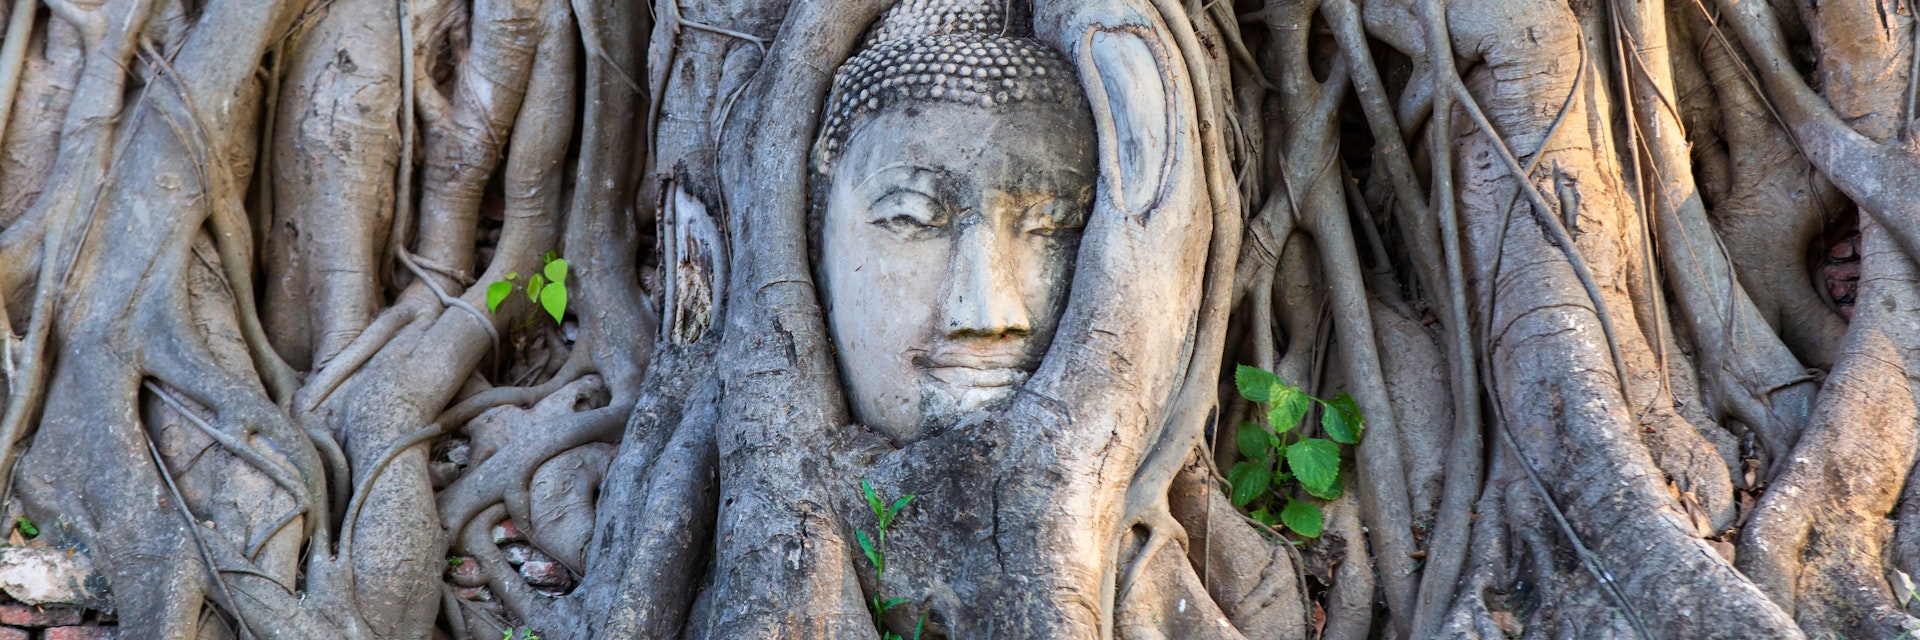 Head of Buddha statue in the tree roots at Wat Mahathat in Ayutthaya Province, Thailand